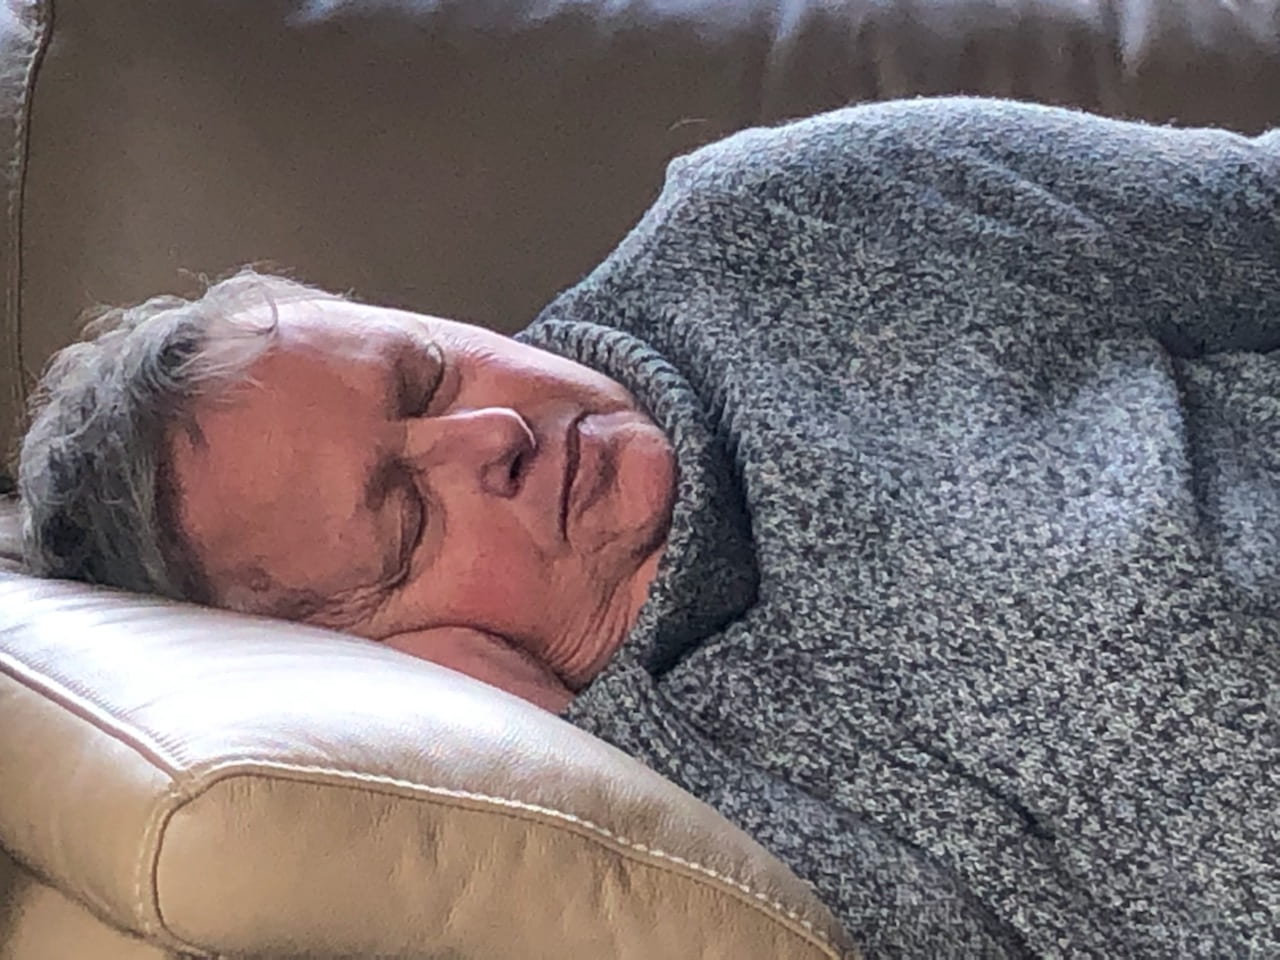 An older woman in a grey jumper sleeps on a couch